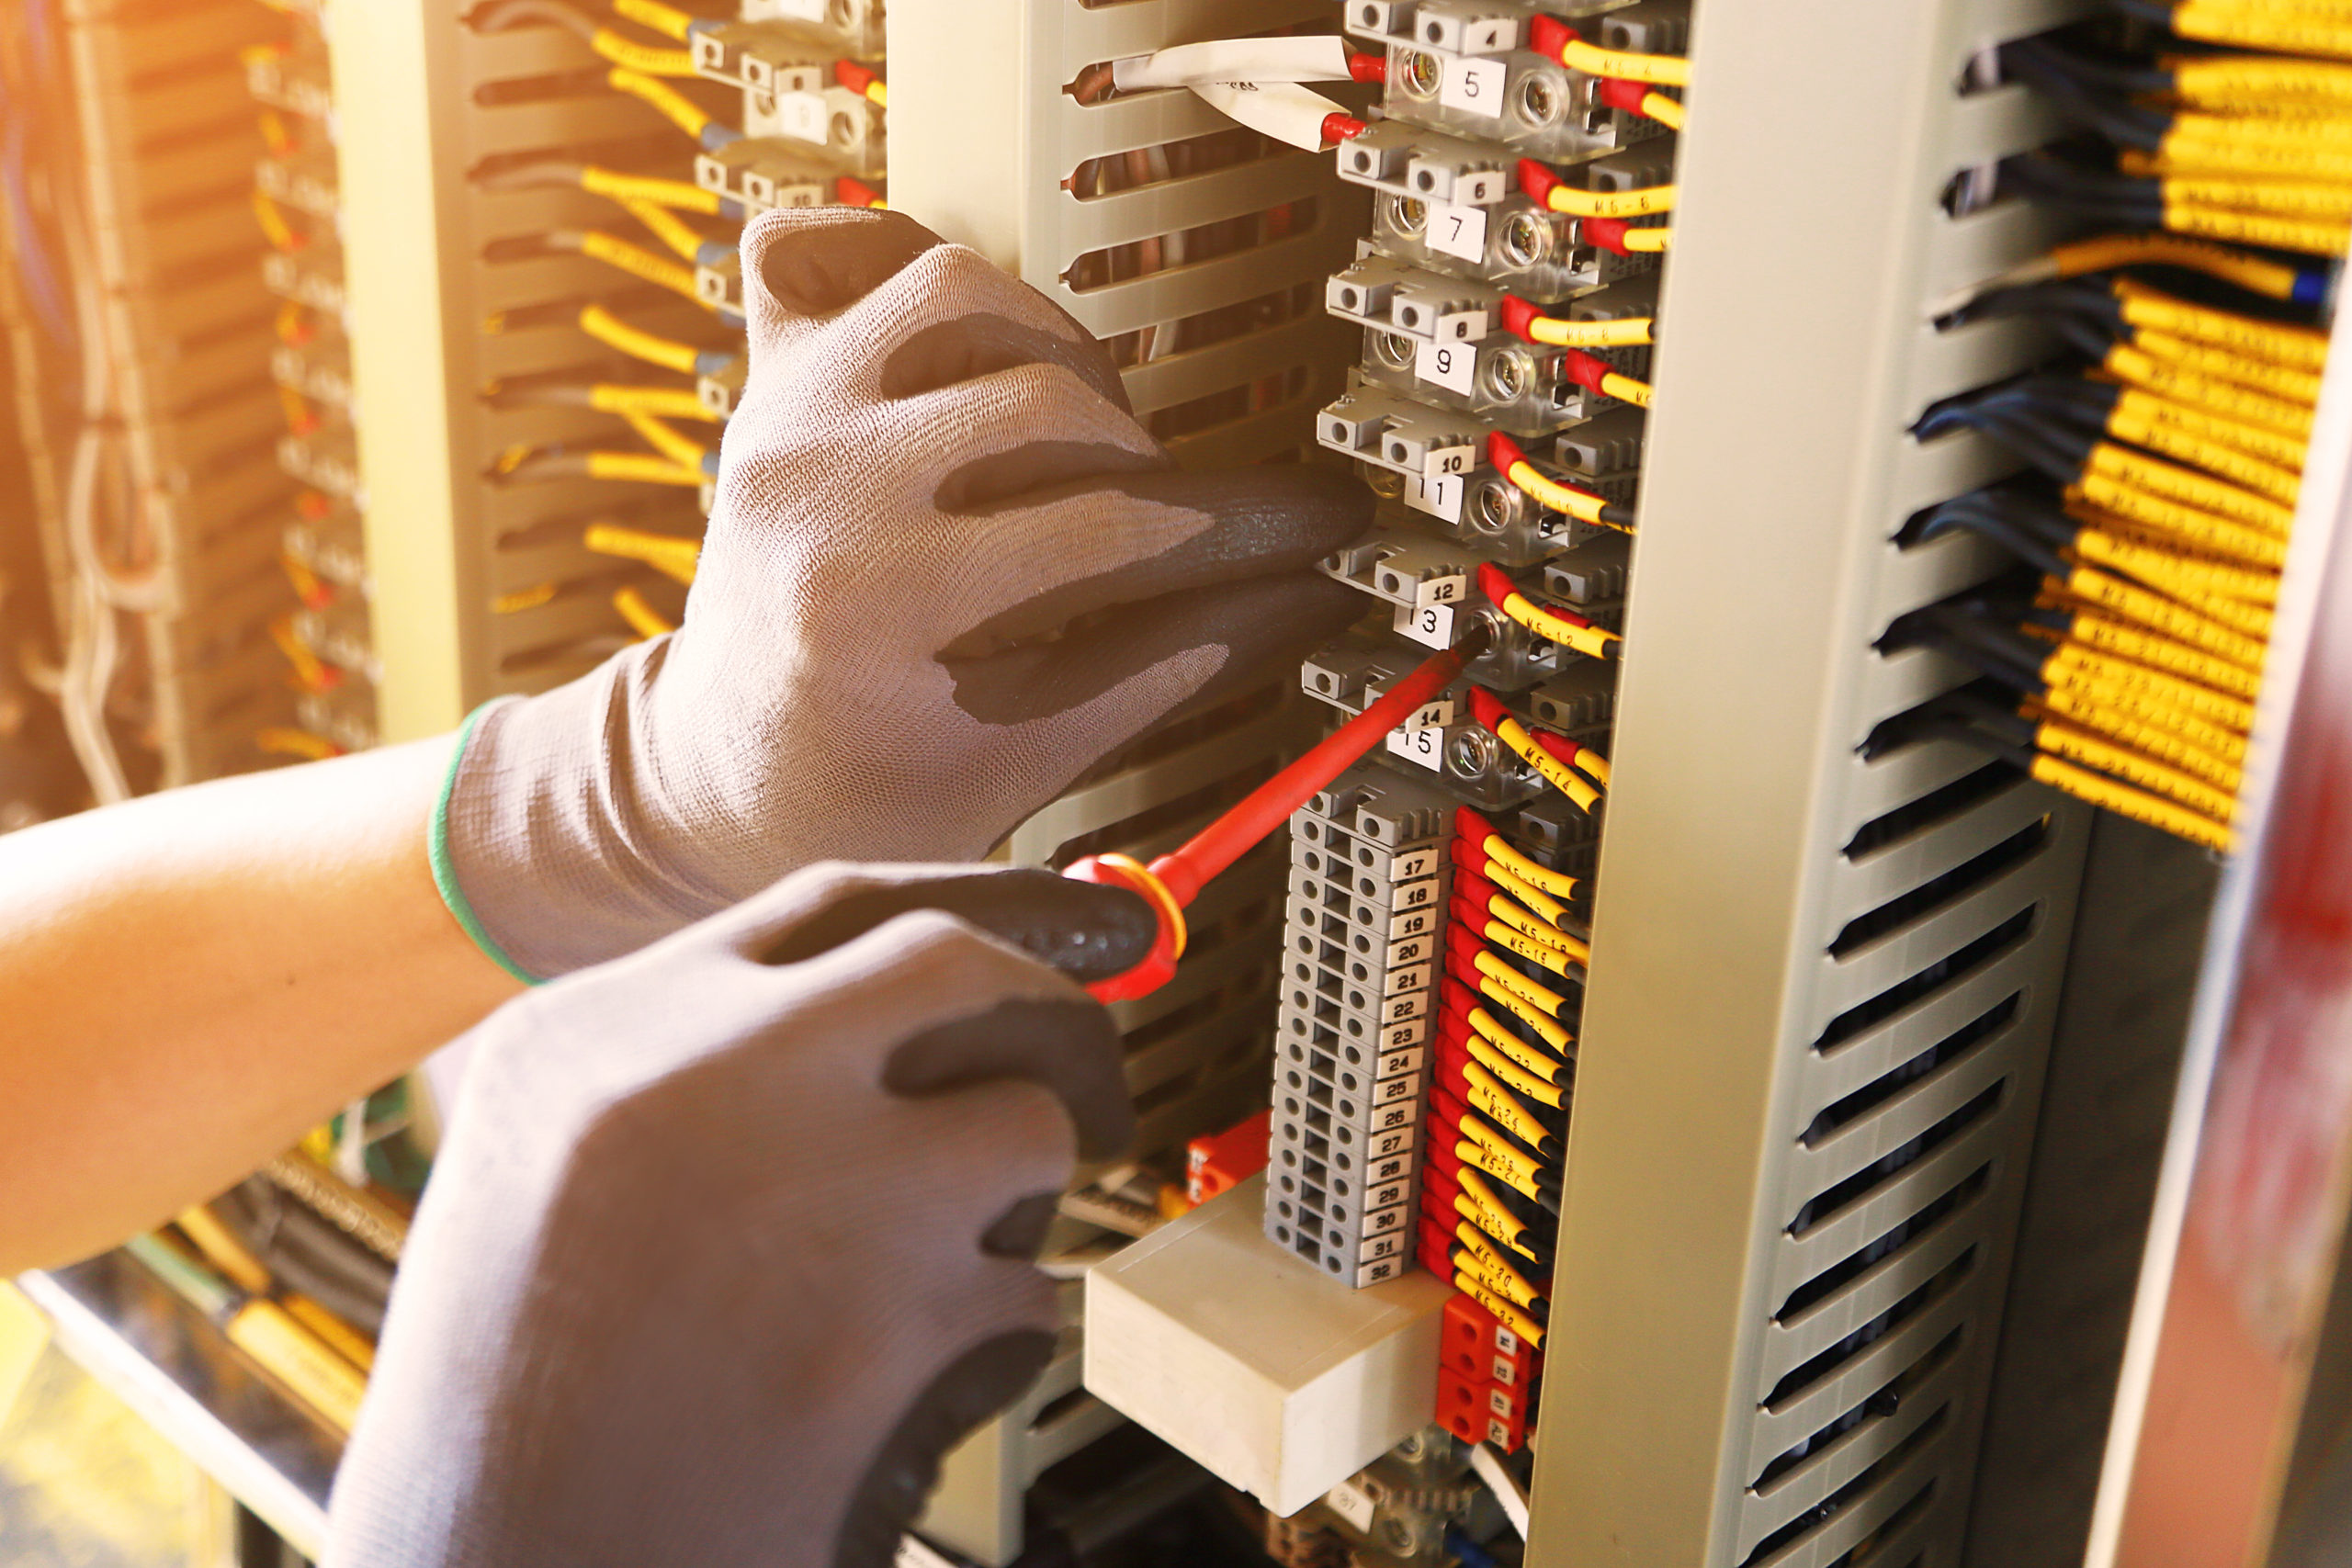 electrician using eVolve MEP software